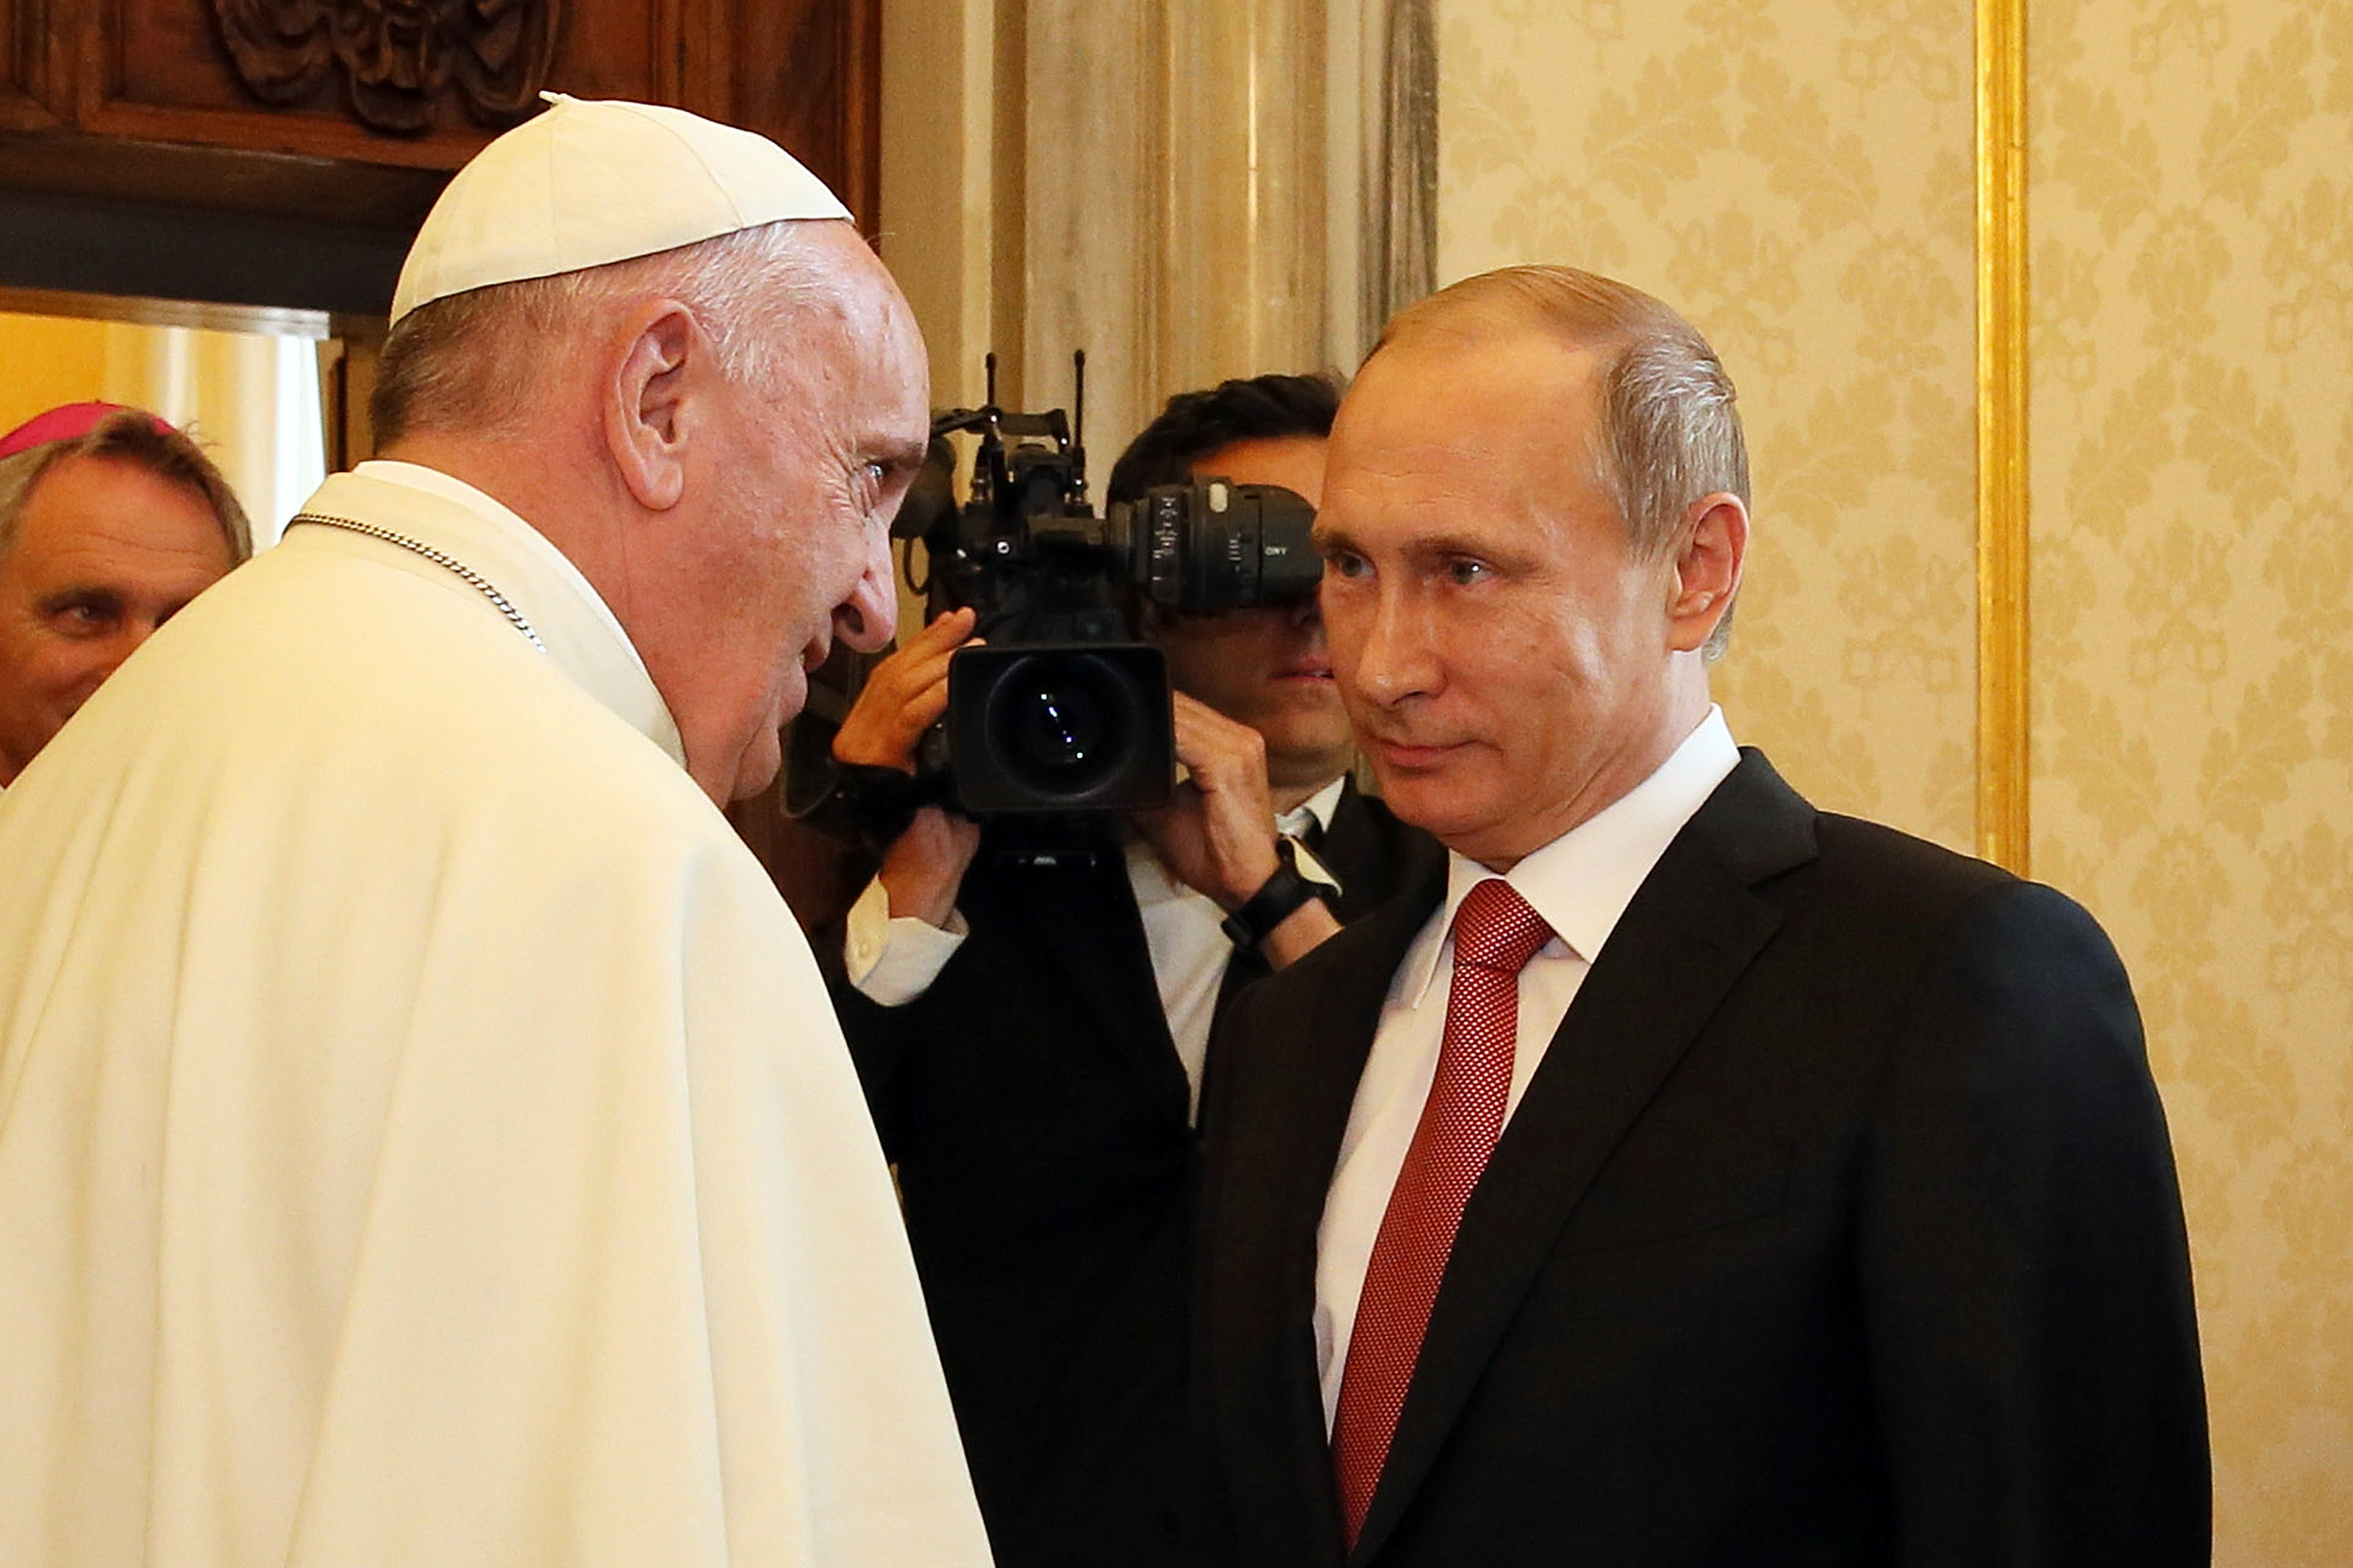 Pope Francis meets President of Russian Federation Vladimir Putin during an audience at the Apostolic Palace on June 10, 2015 in Vatican City, Vatican. (Vatican Pool—Getty Images)